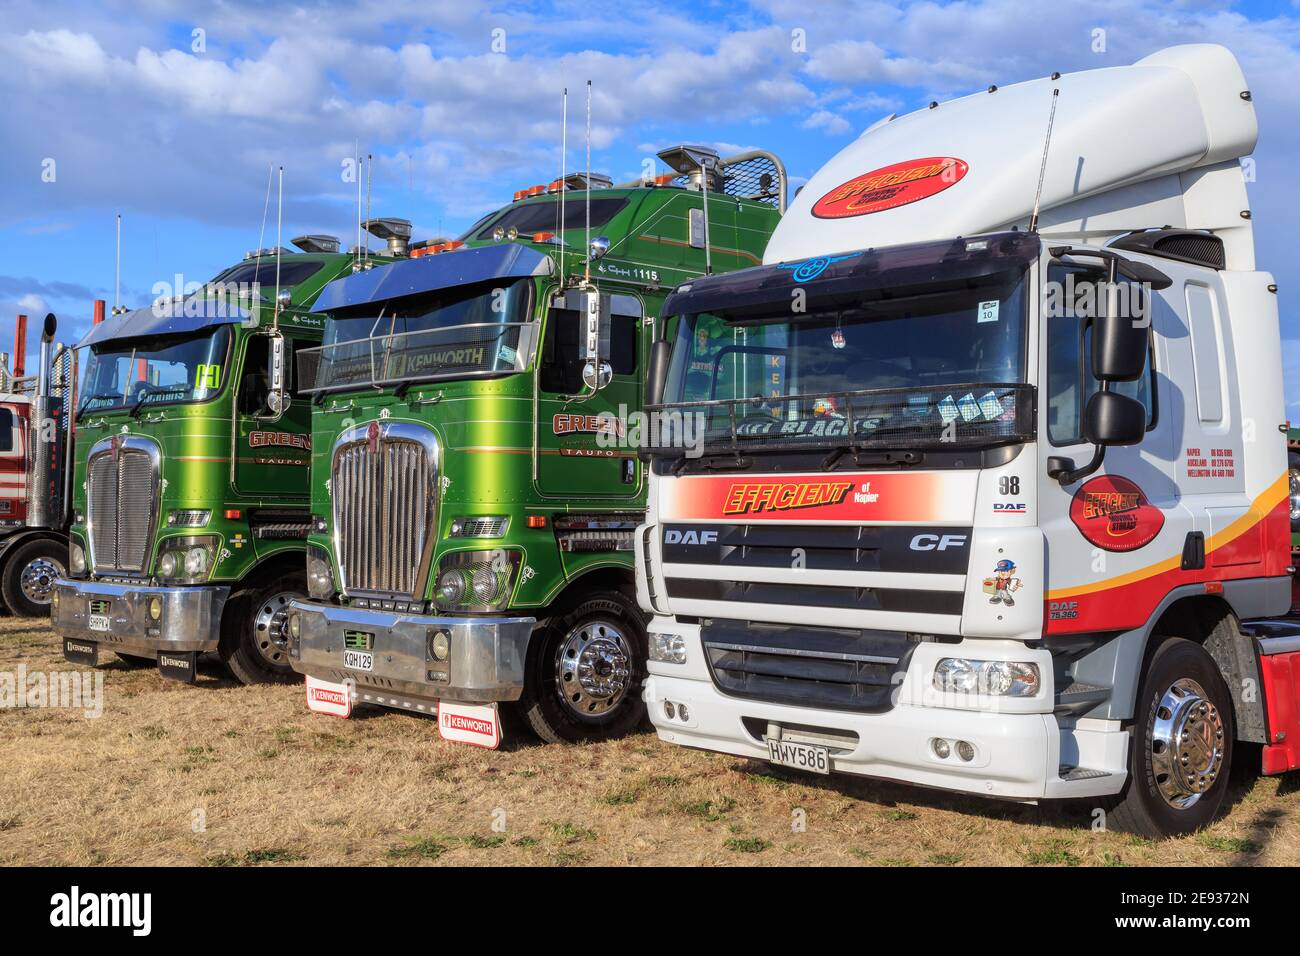 A row of trucks at a truck show. In the foreground is a white DAF, with two green Kenworths next to it Stock Photo